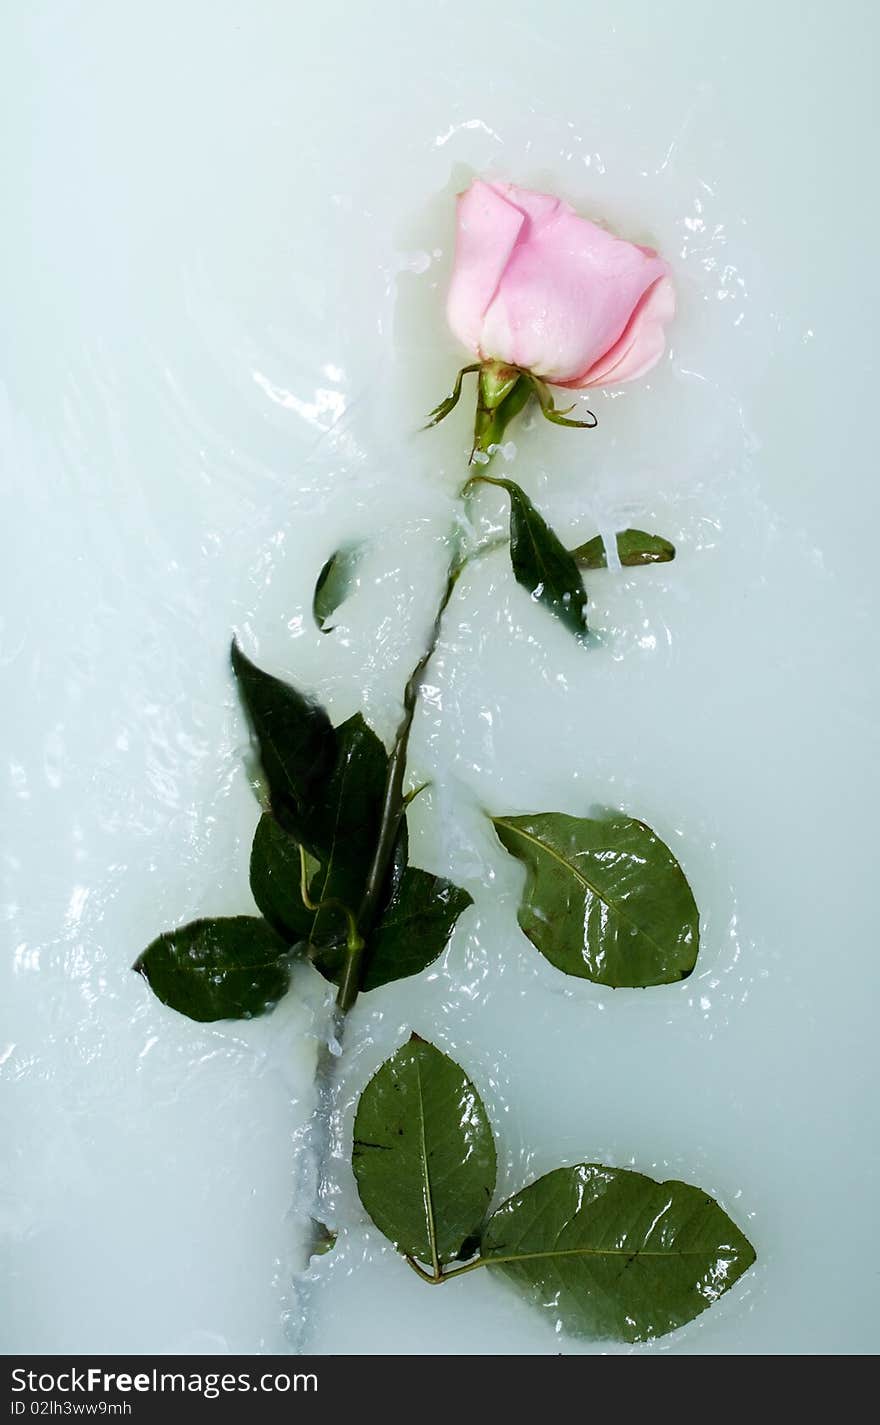 Fresh pink rose in water with milk and drops